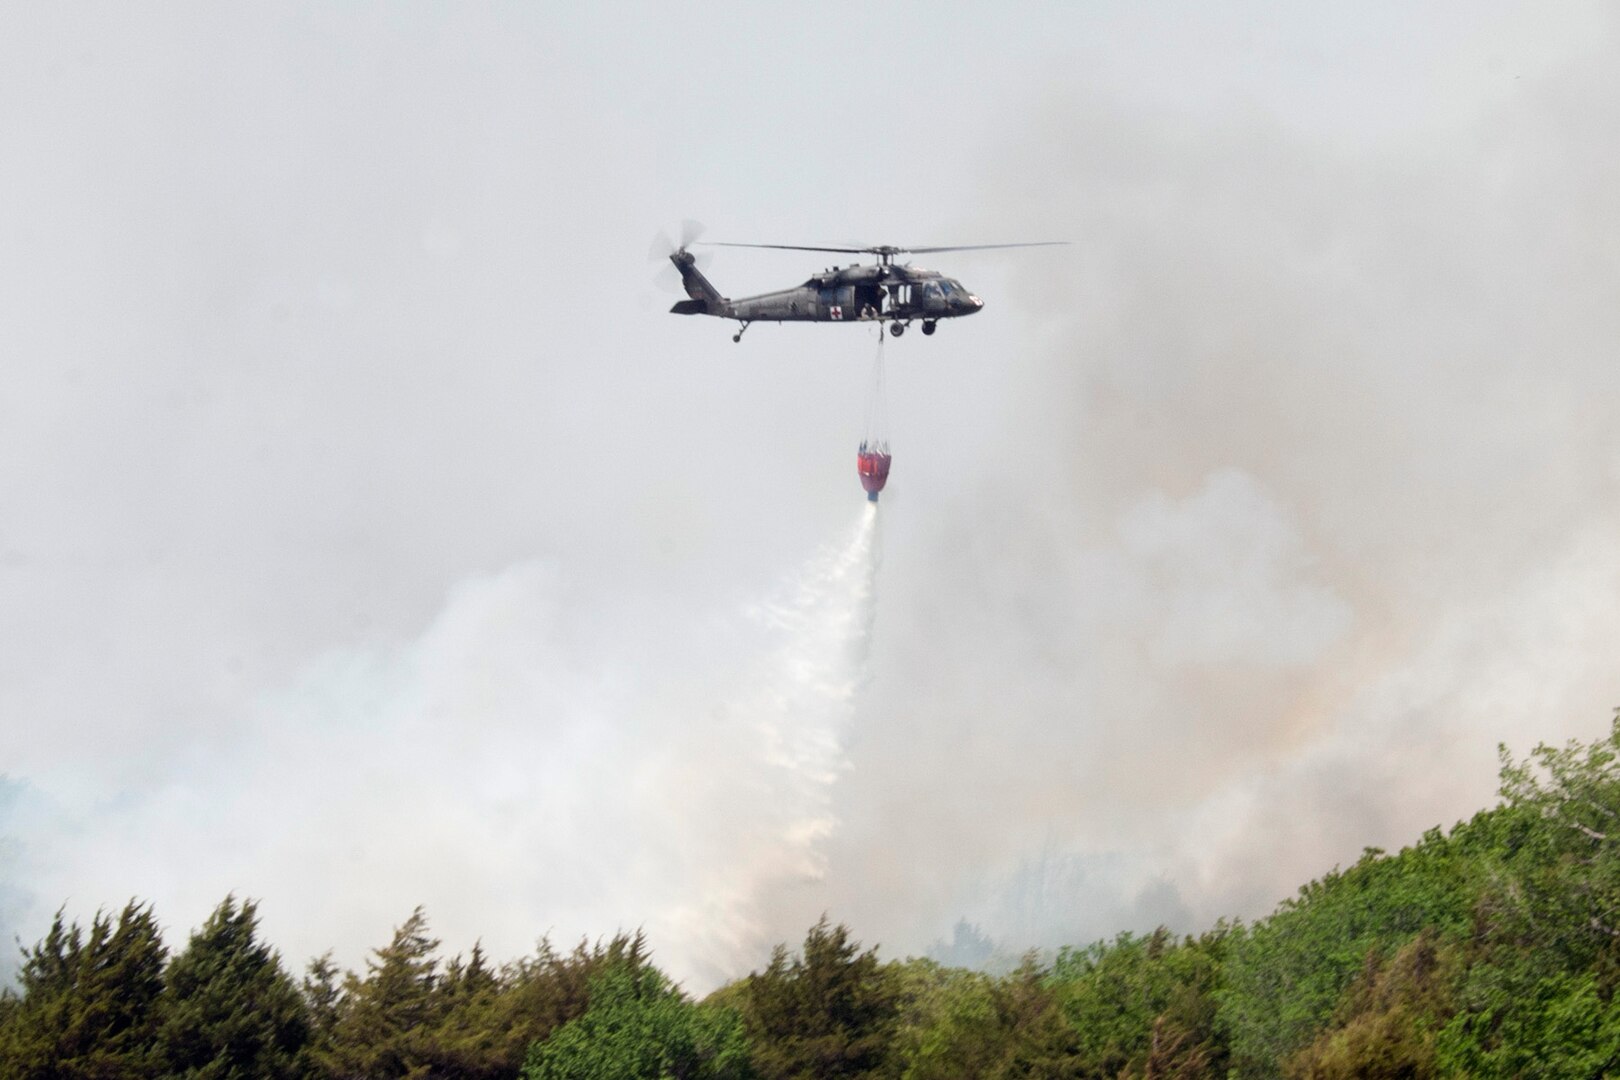 A UH-60 Black Hawk helicopter from the Oklahoma Army National Guard assists local firefighters near Guthrie, Oklahoma, as they attempt to contain wildfires that claimed more than 6,000 acres of land and numerous homes in less than 24 hours. The Blackhawks can carry 660 gallons of water in their "Bambi Bucket" which they refill in ponds and reservoirs. 